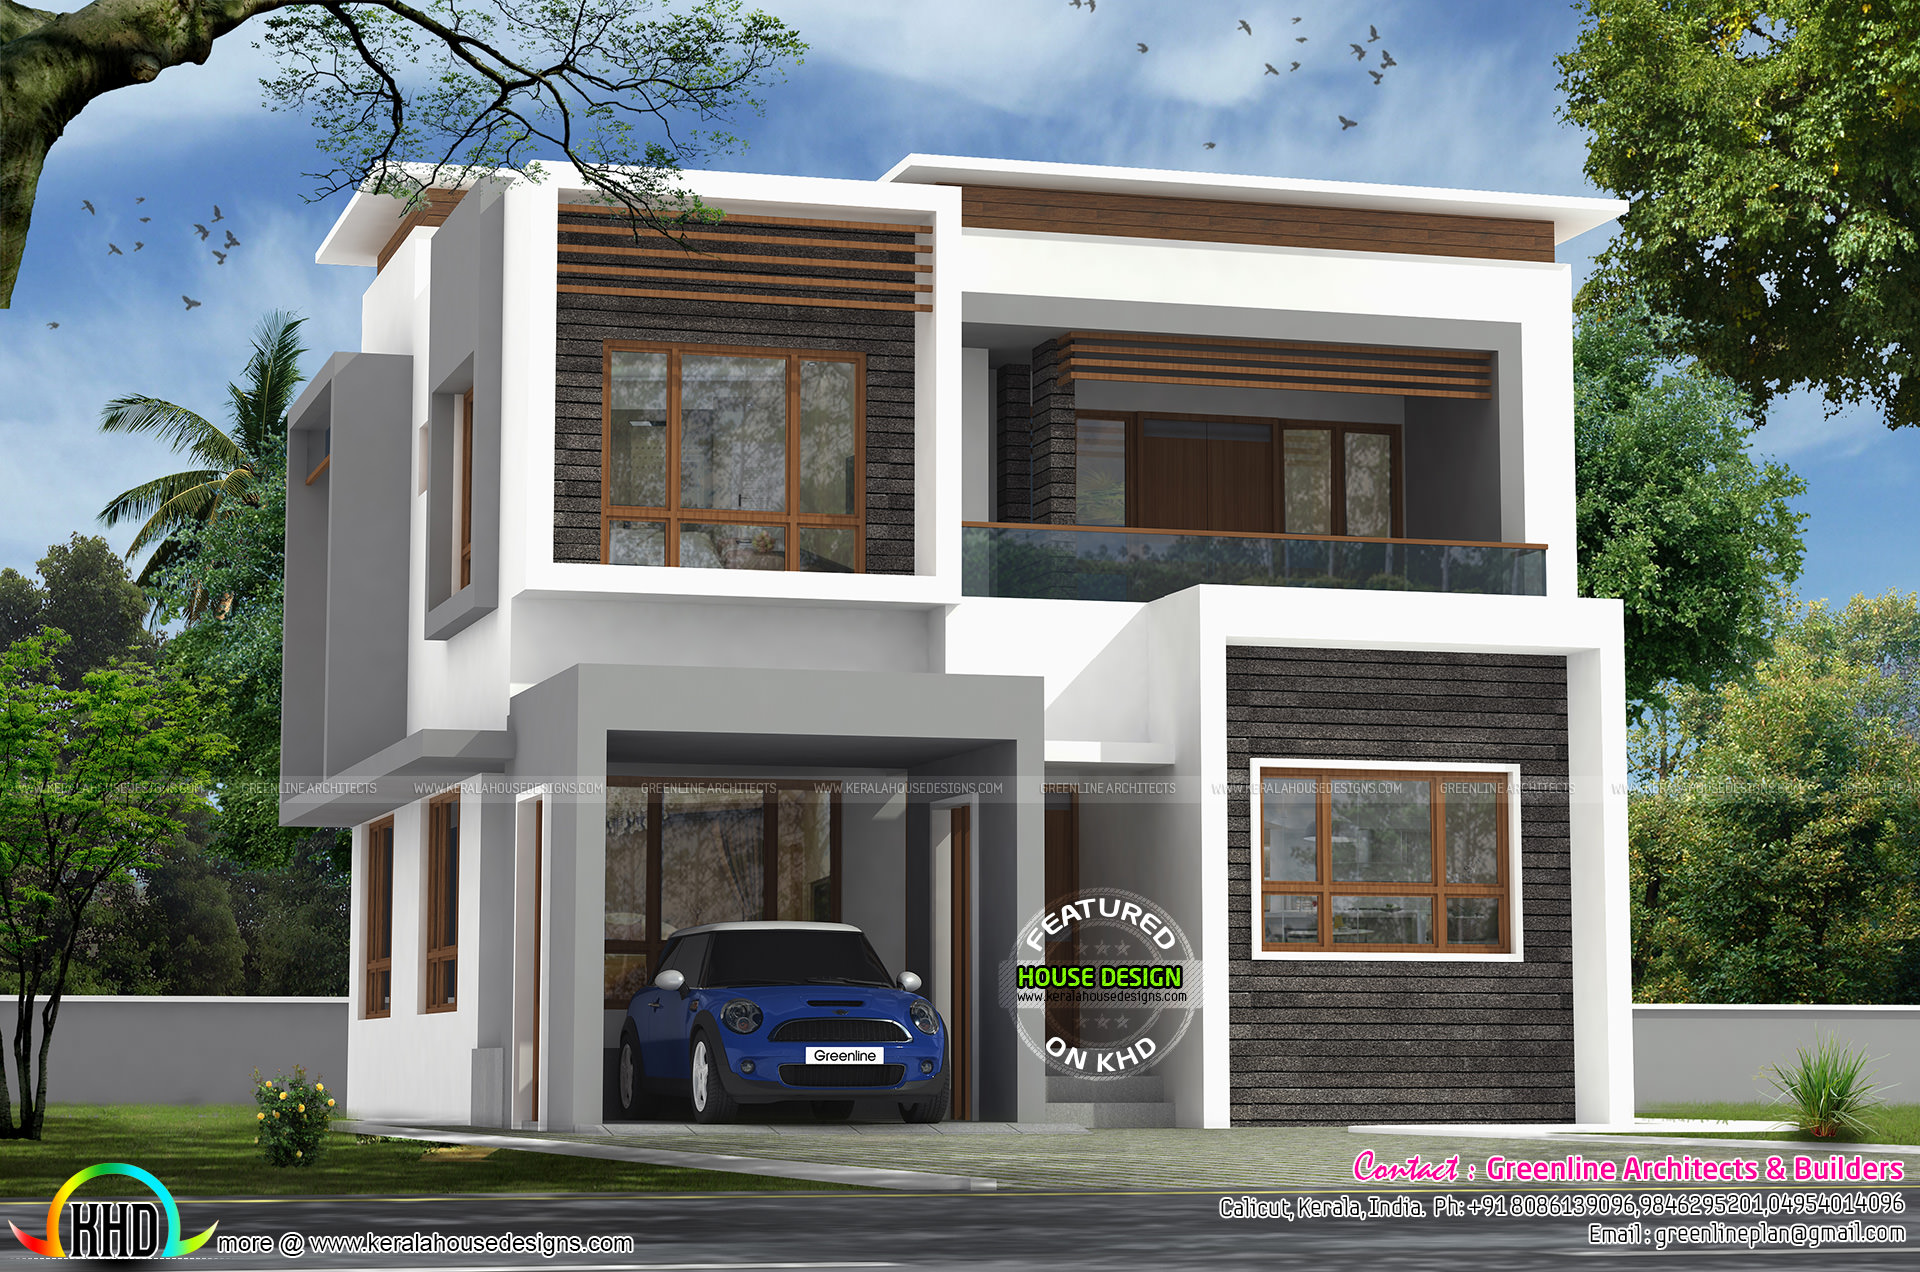 3 bedroom 40x50 modern house architecture - Kerala home ...